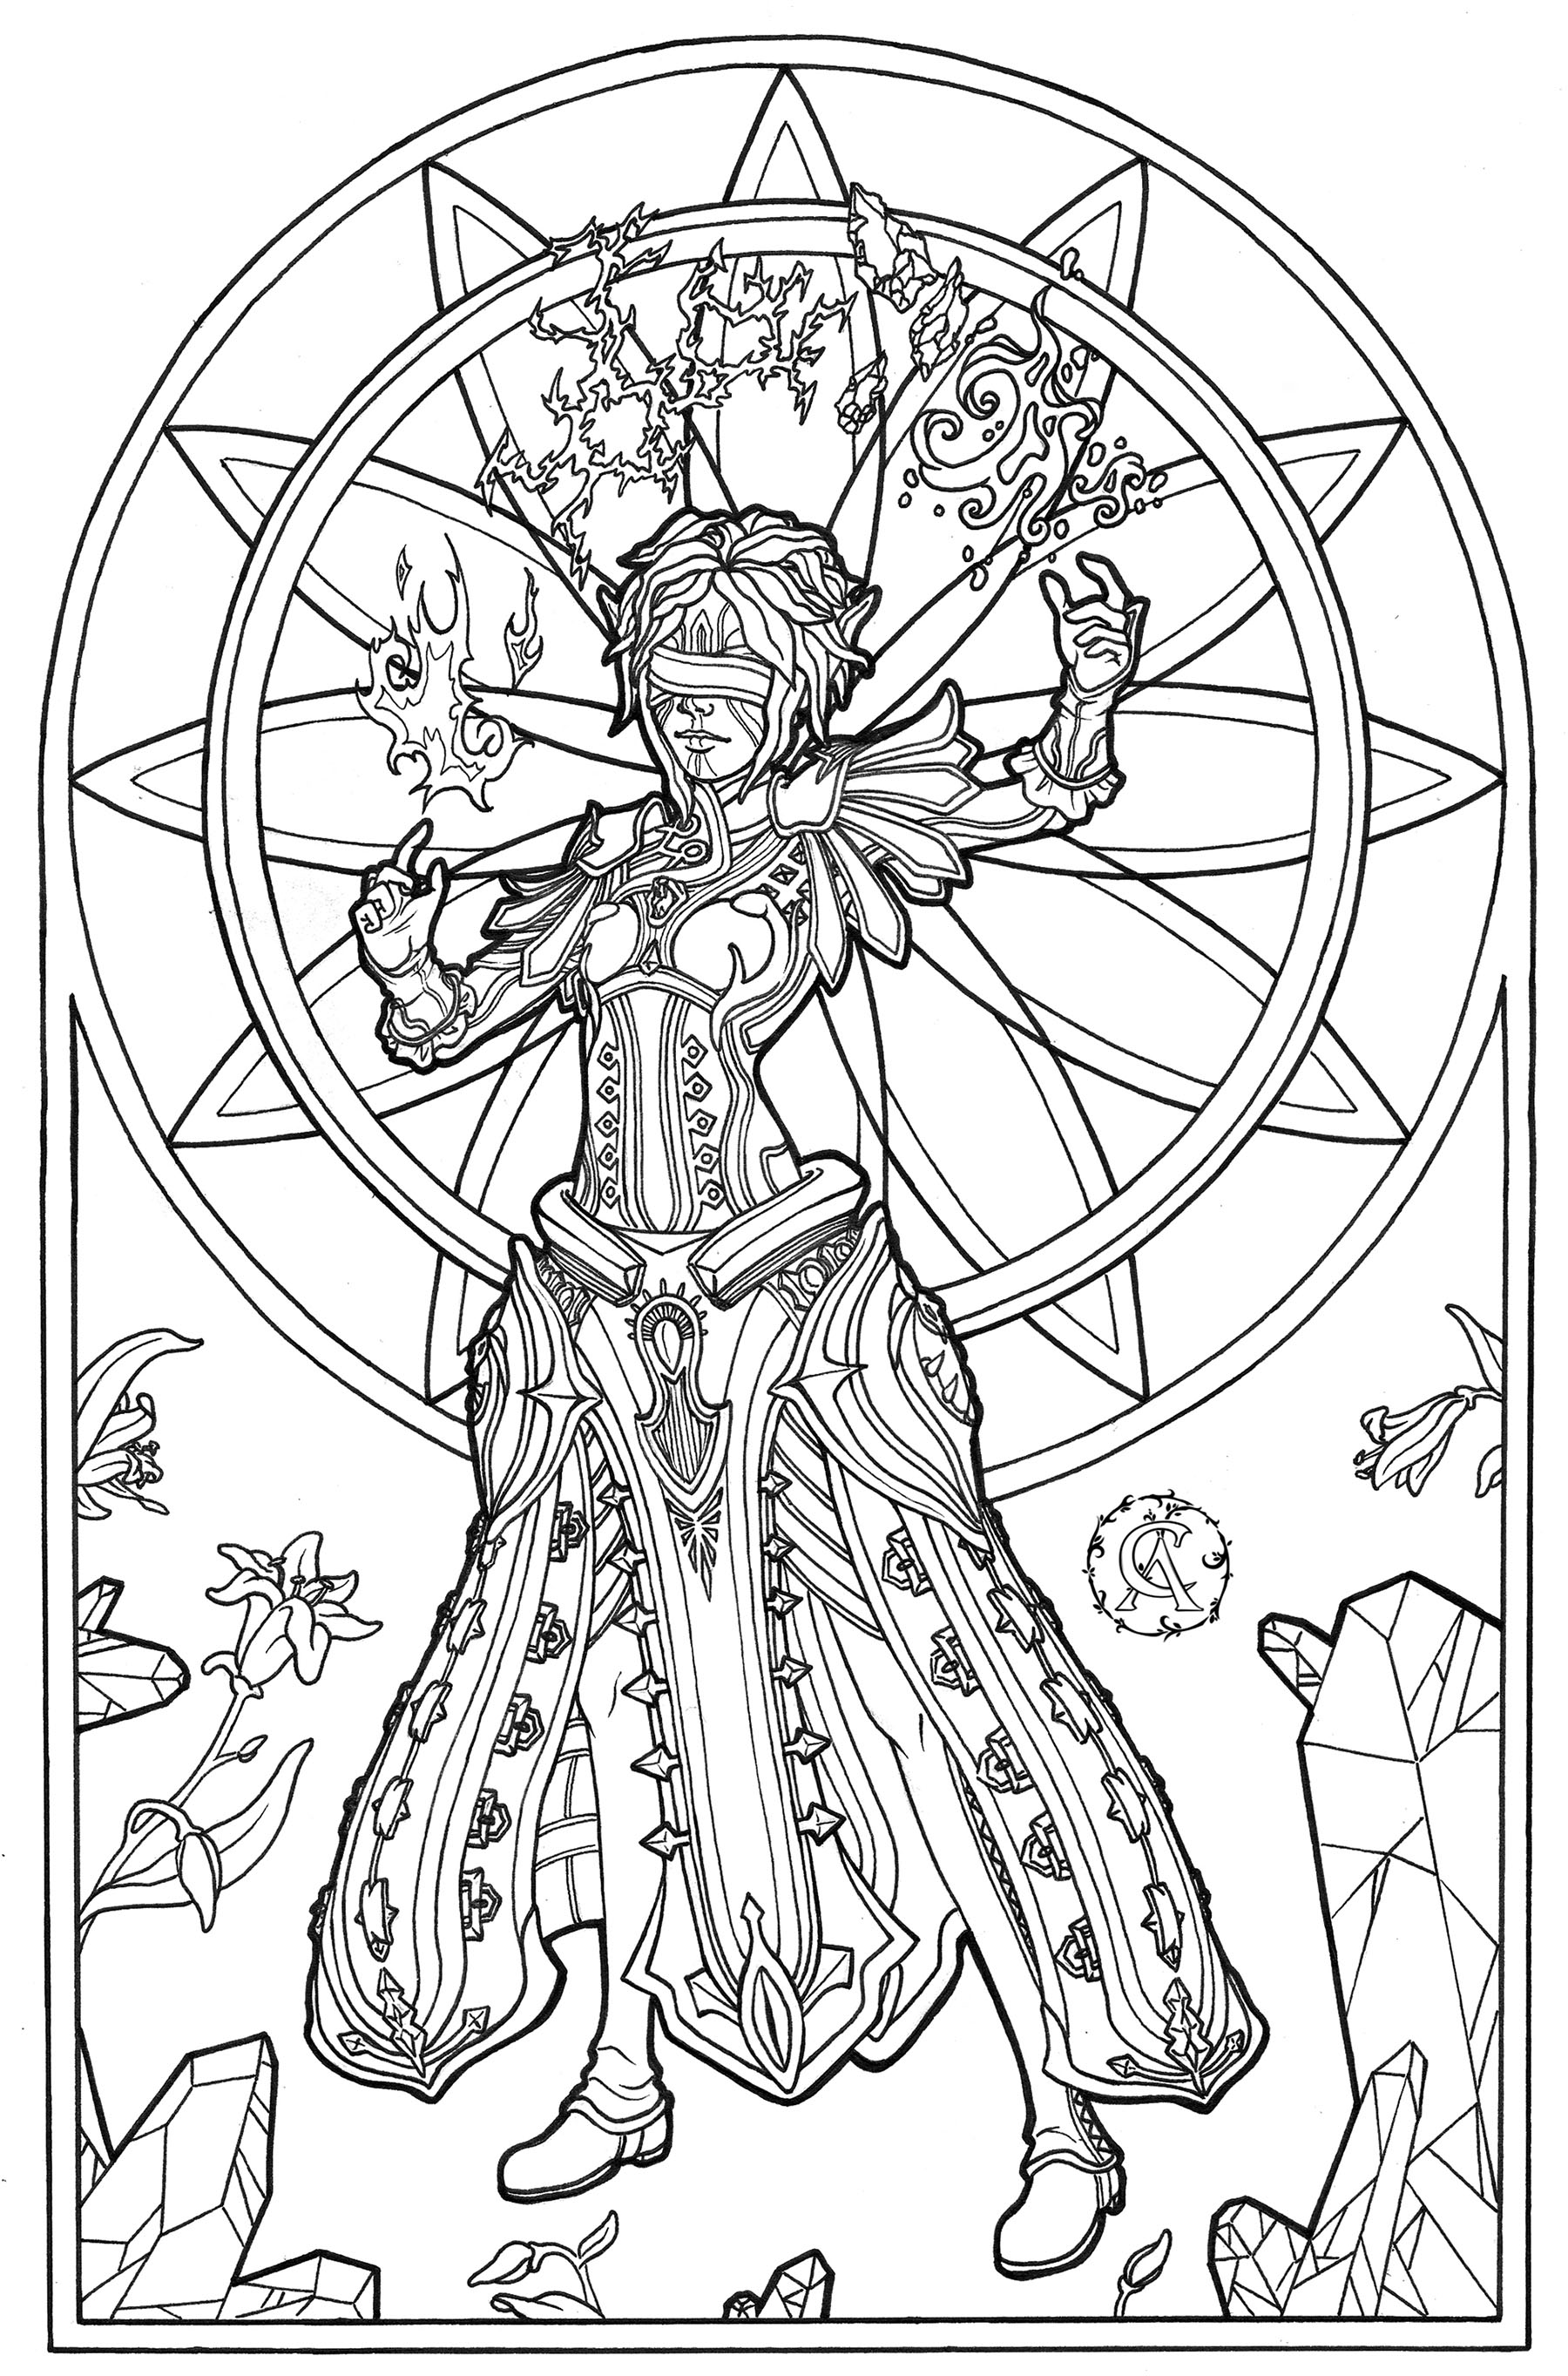 The magician - Myths & legends Adult Coloring Pages - Page fairy-tales/